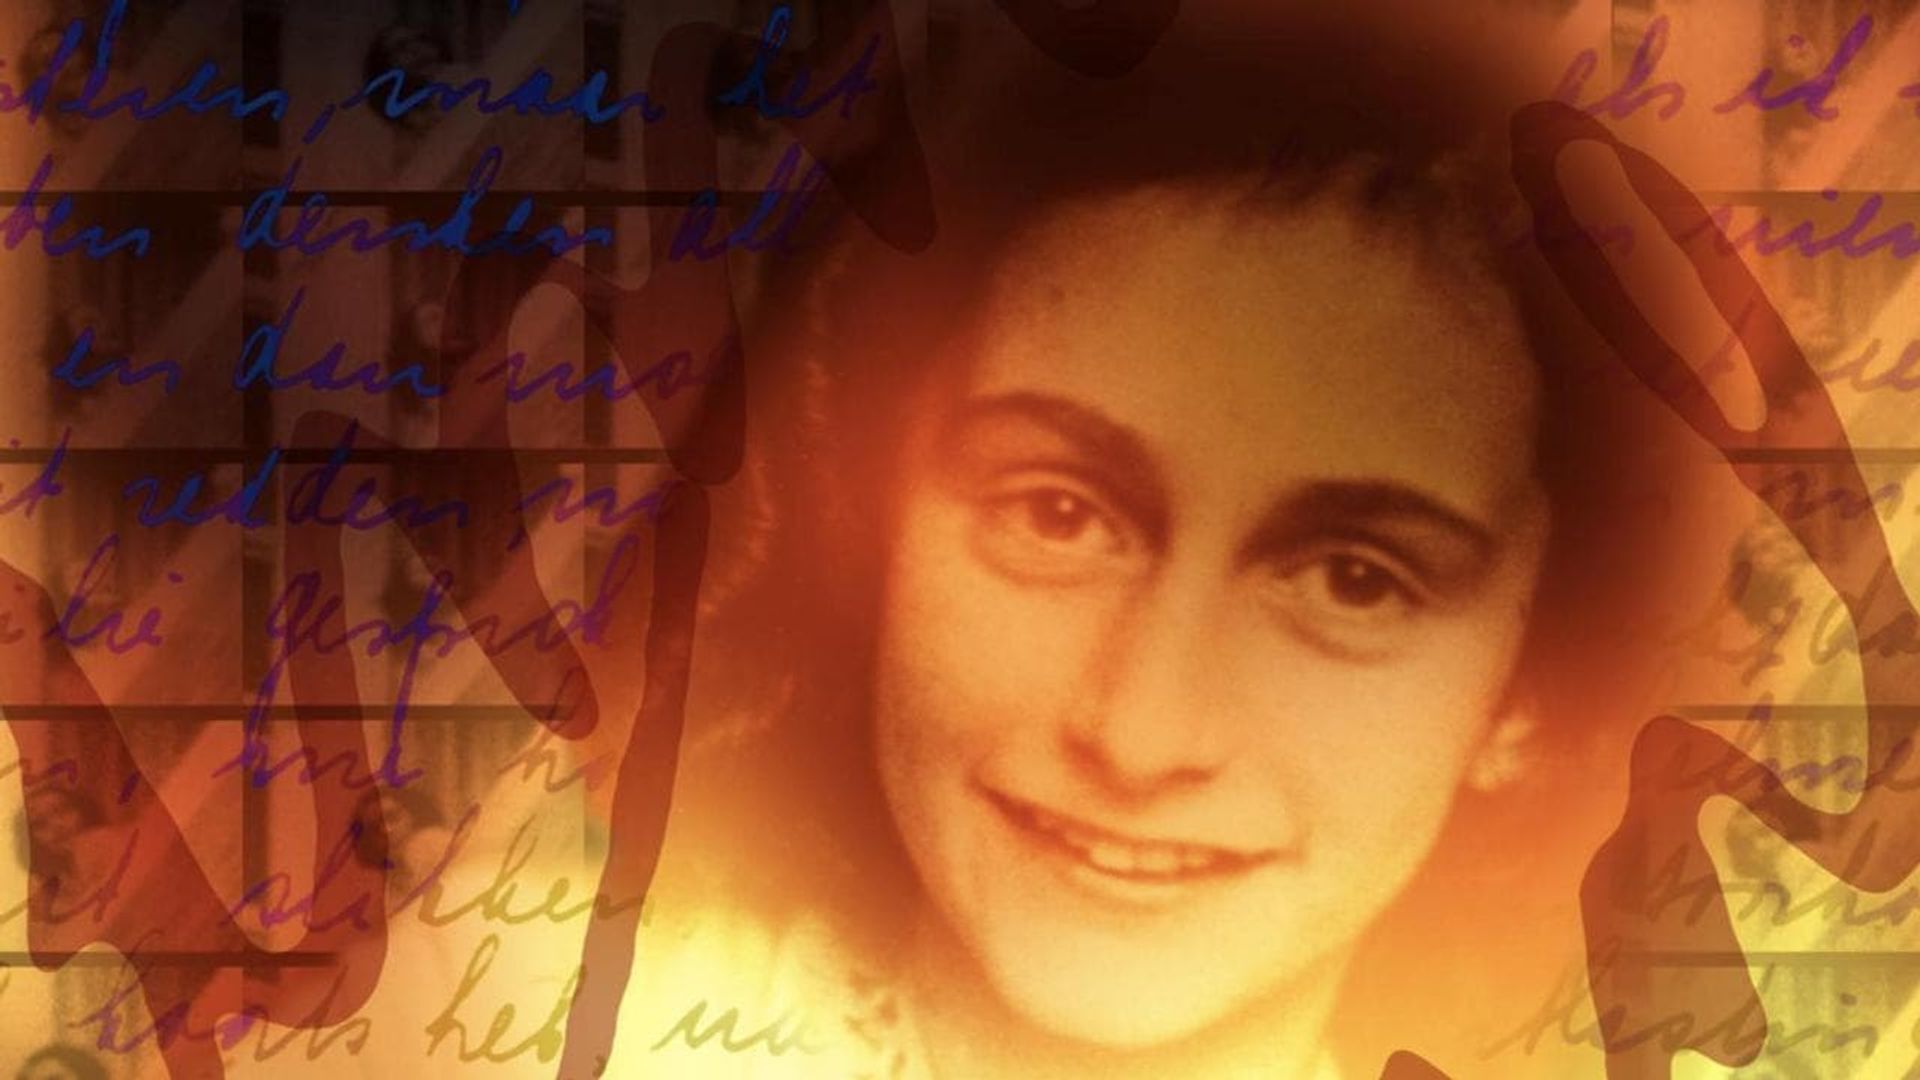 Anne Frank's Holocaust background